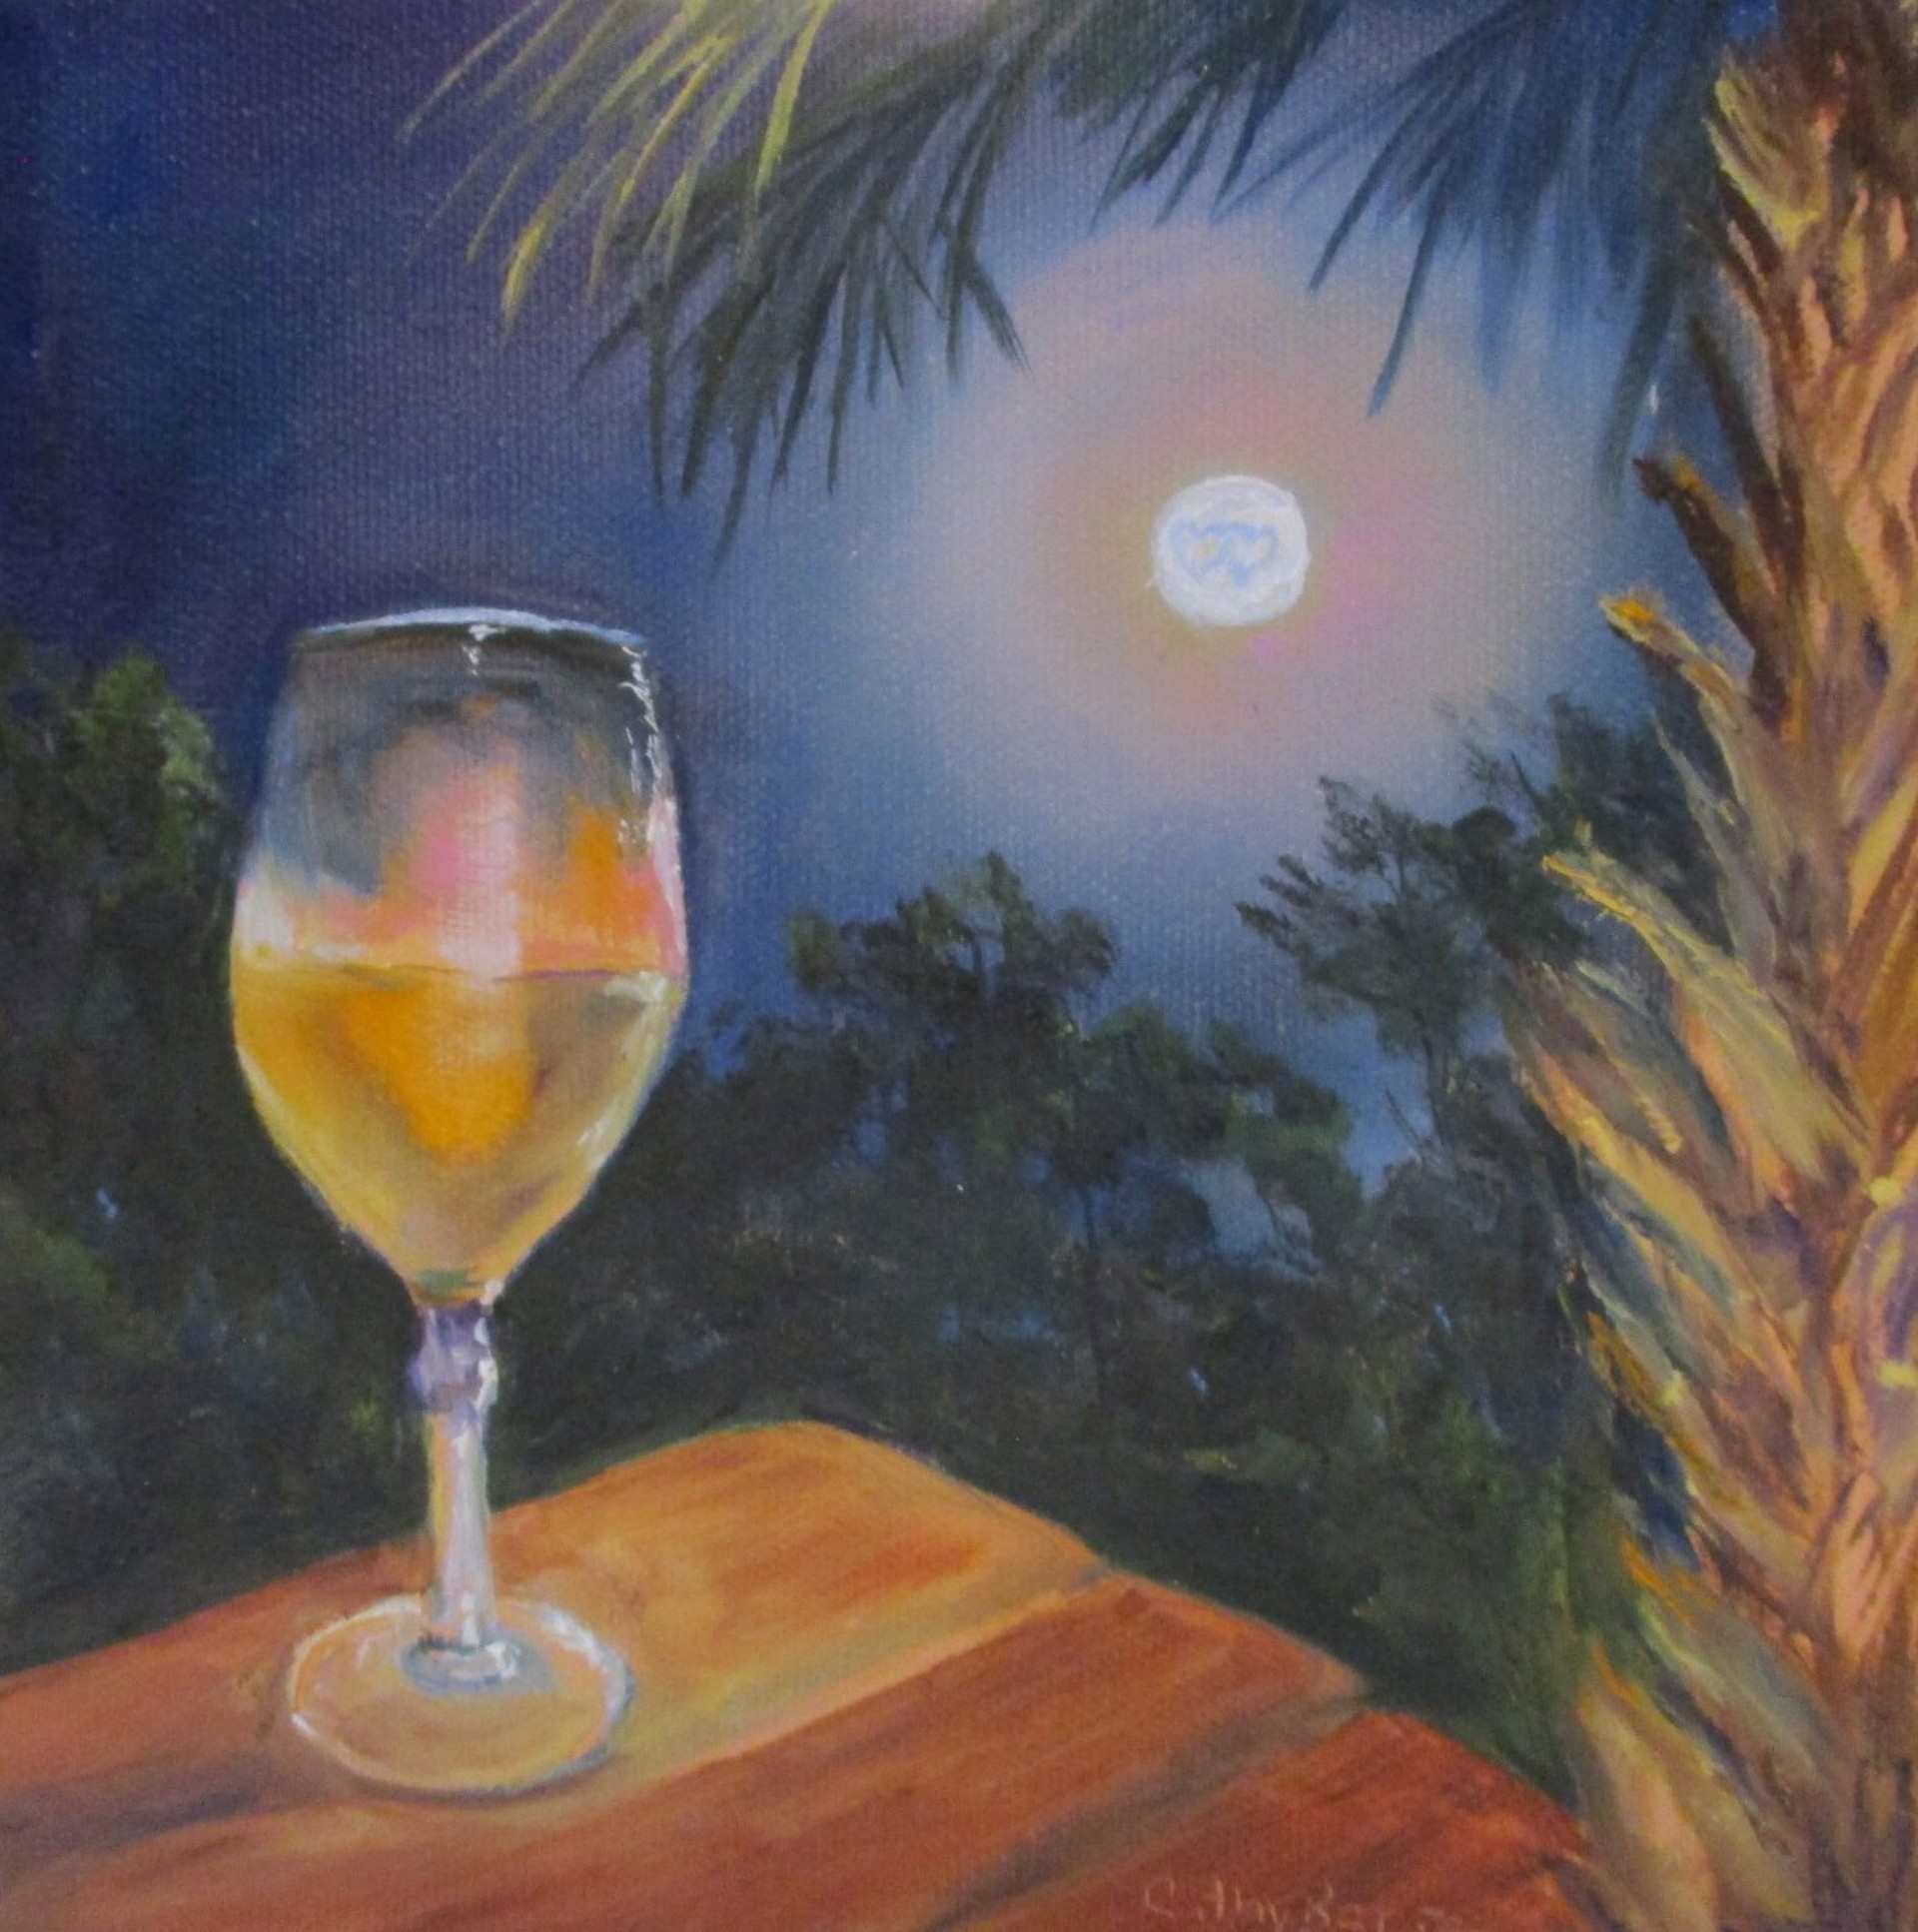 A Toast to Love by Cathy Berse